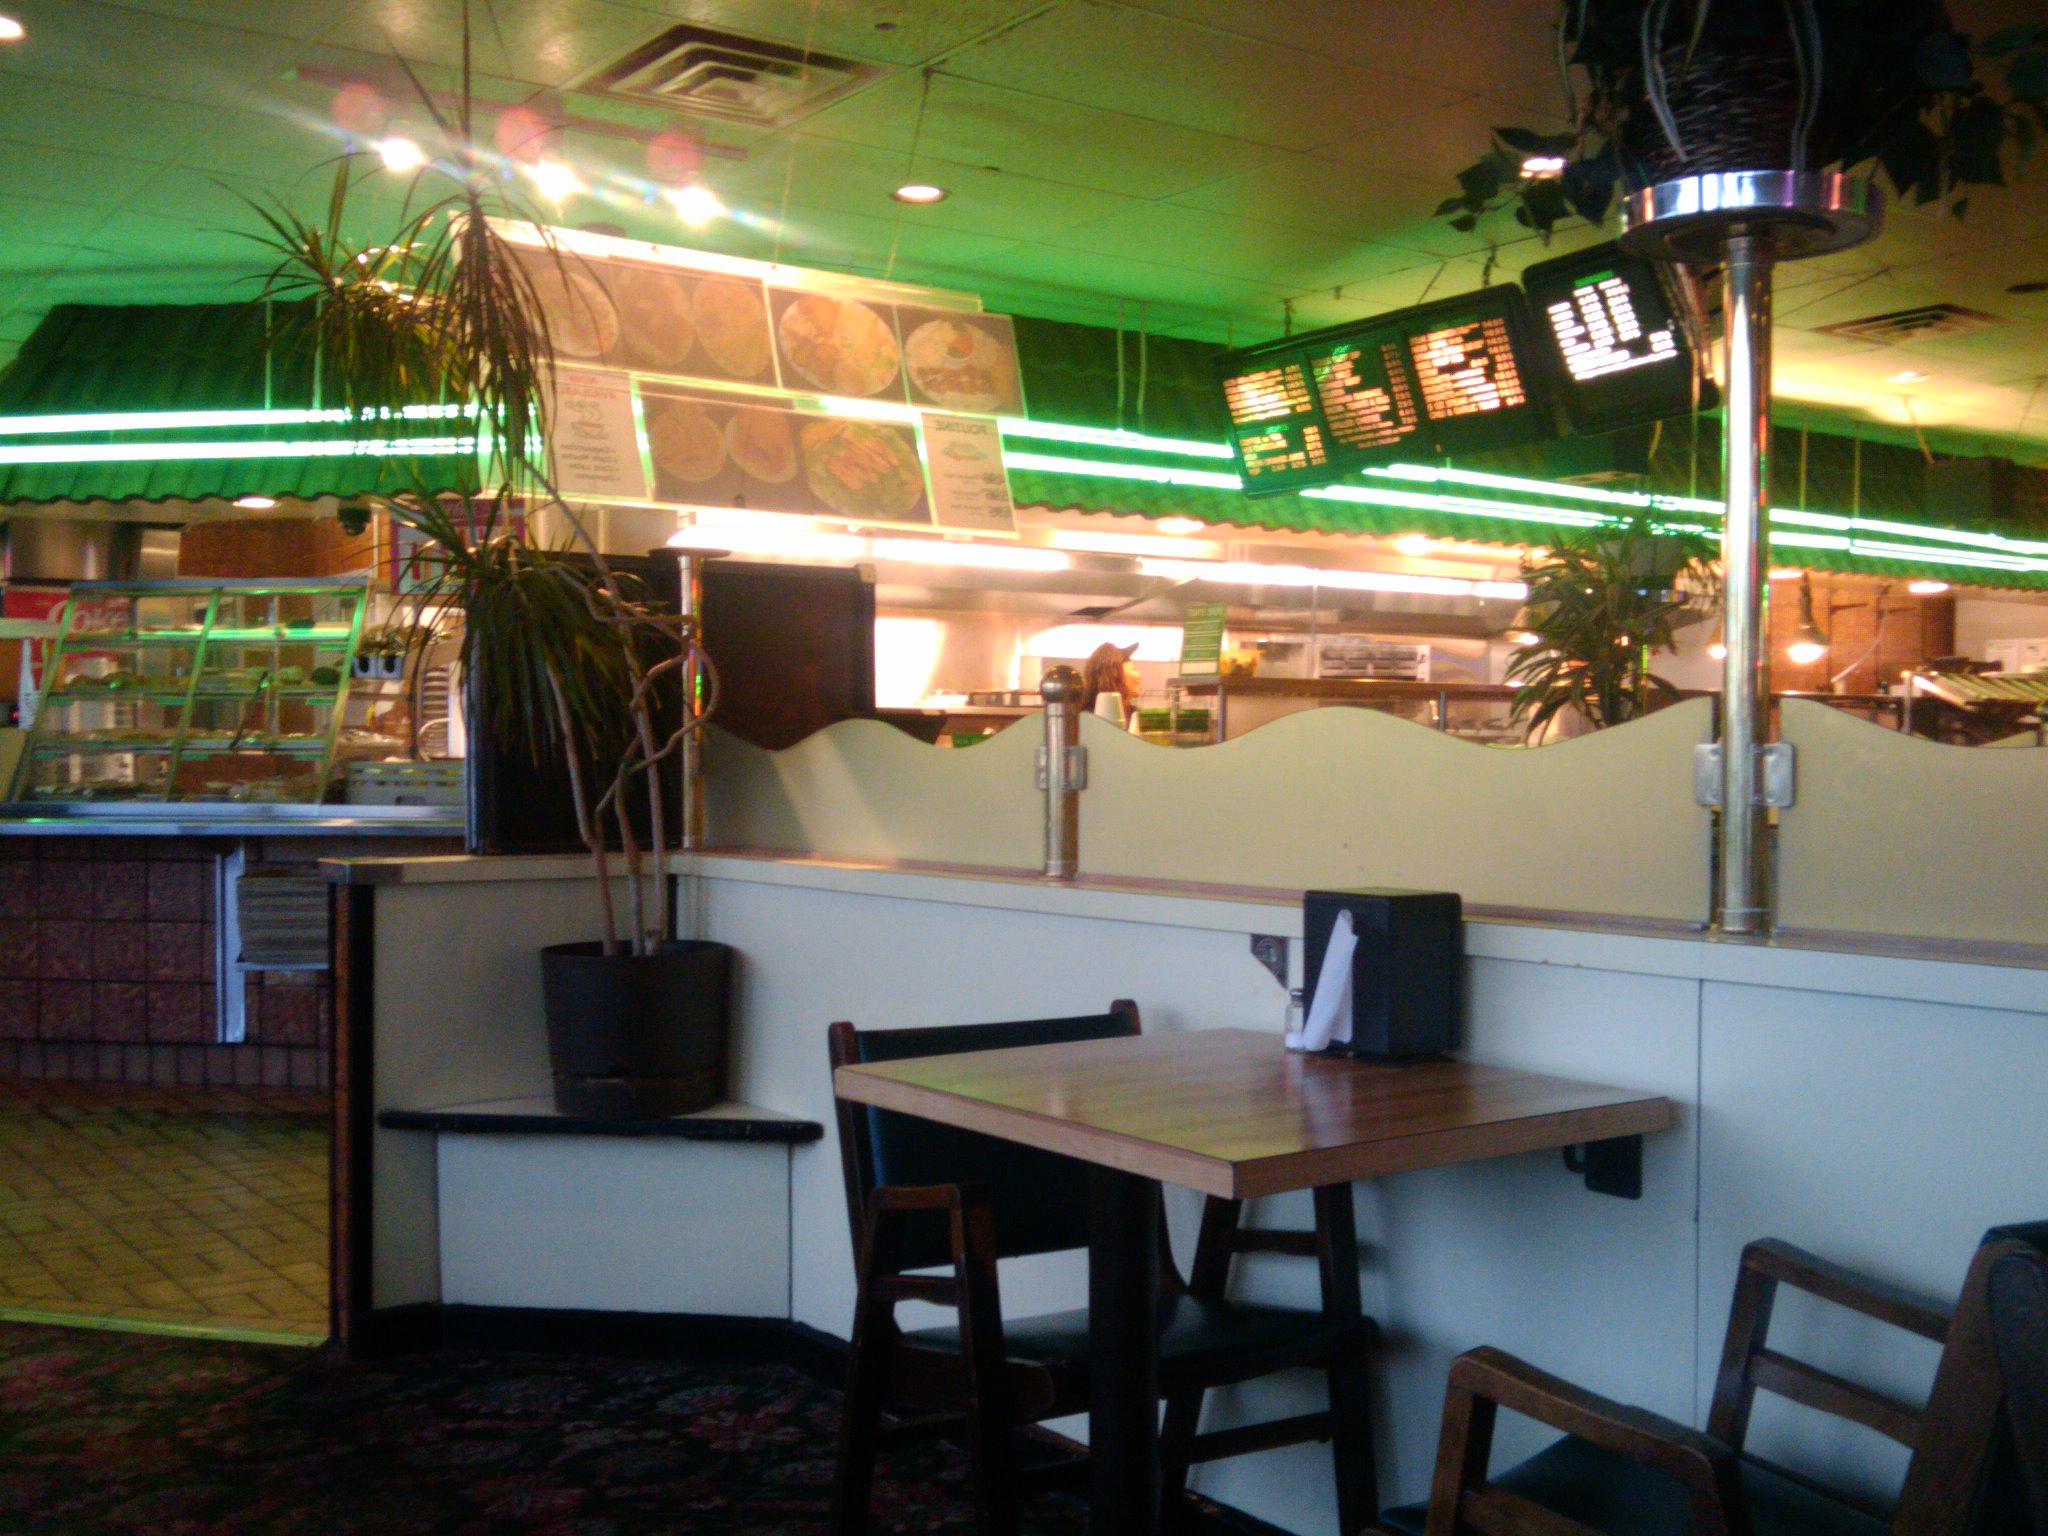 the restaurant's large windows are bright green